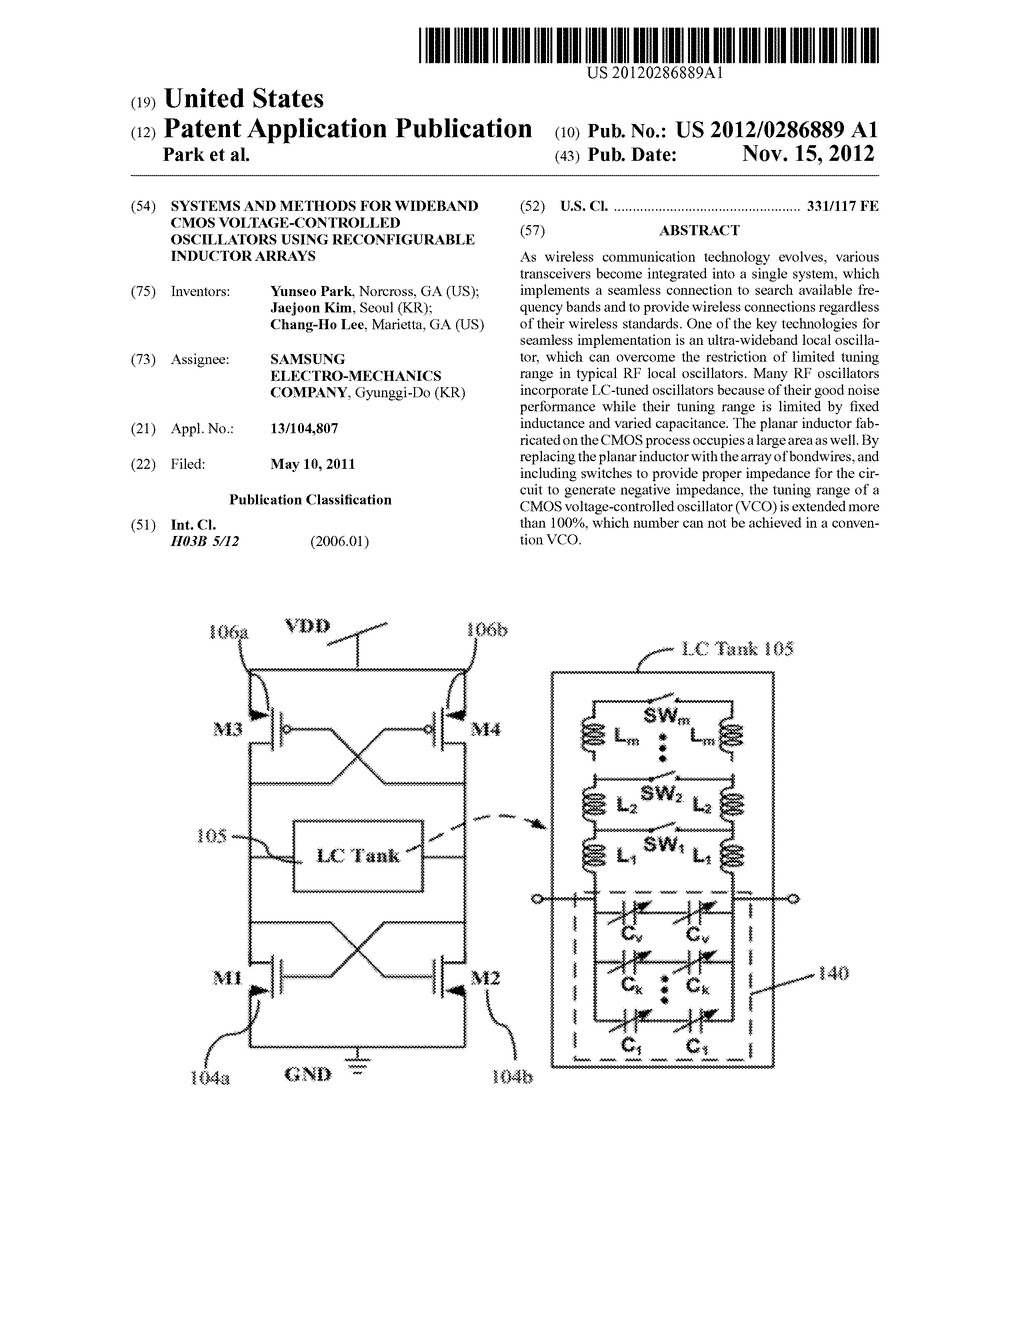 Systems and Methods for Wideband CMOS Voltage-Controlled Oscillators Using     Reconfigurable Inductor Arrays - diagram, schematic, and image 01